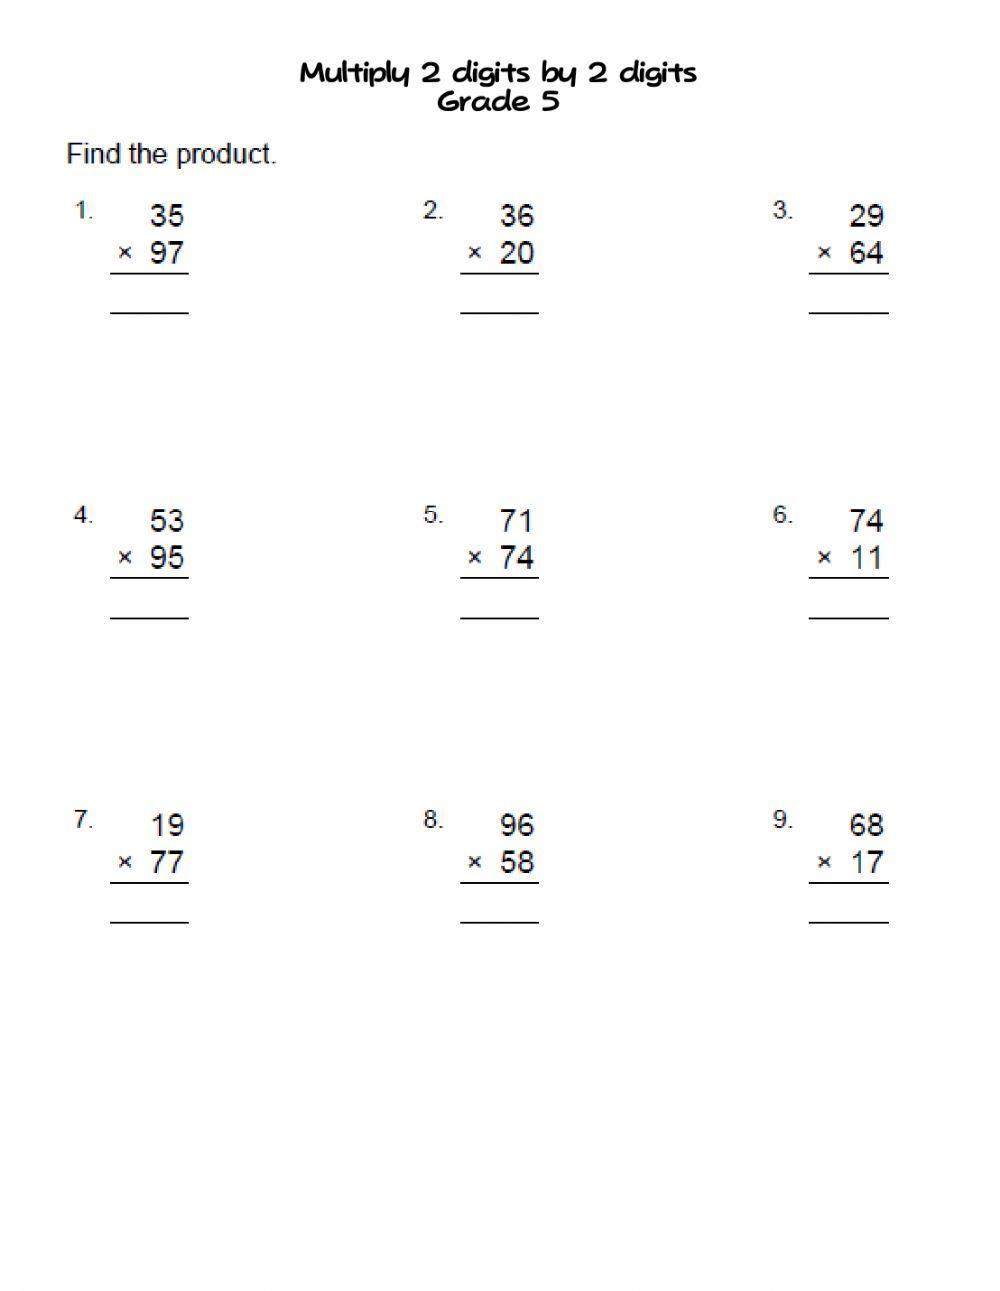 Multiply 2 digits by 2 digits grade 5